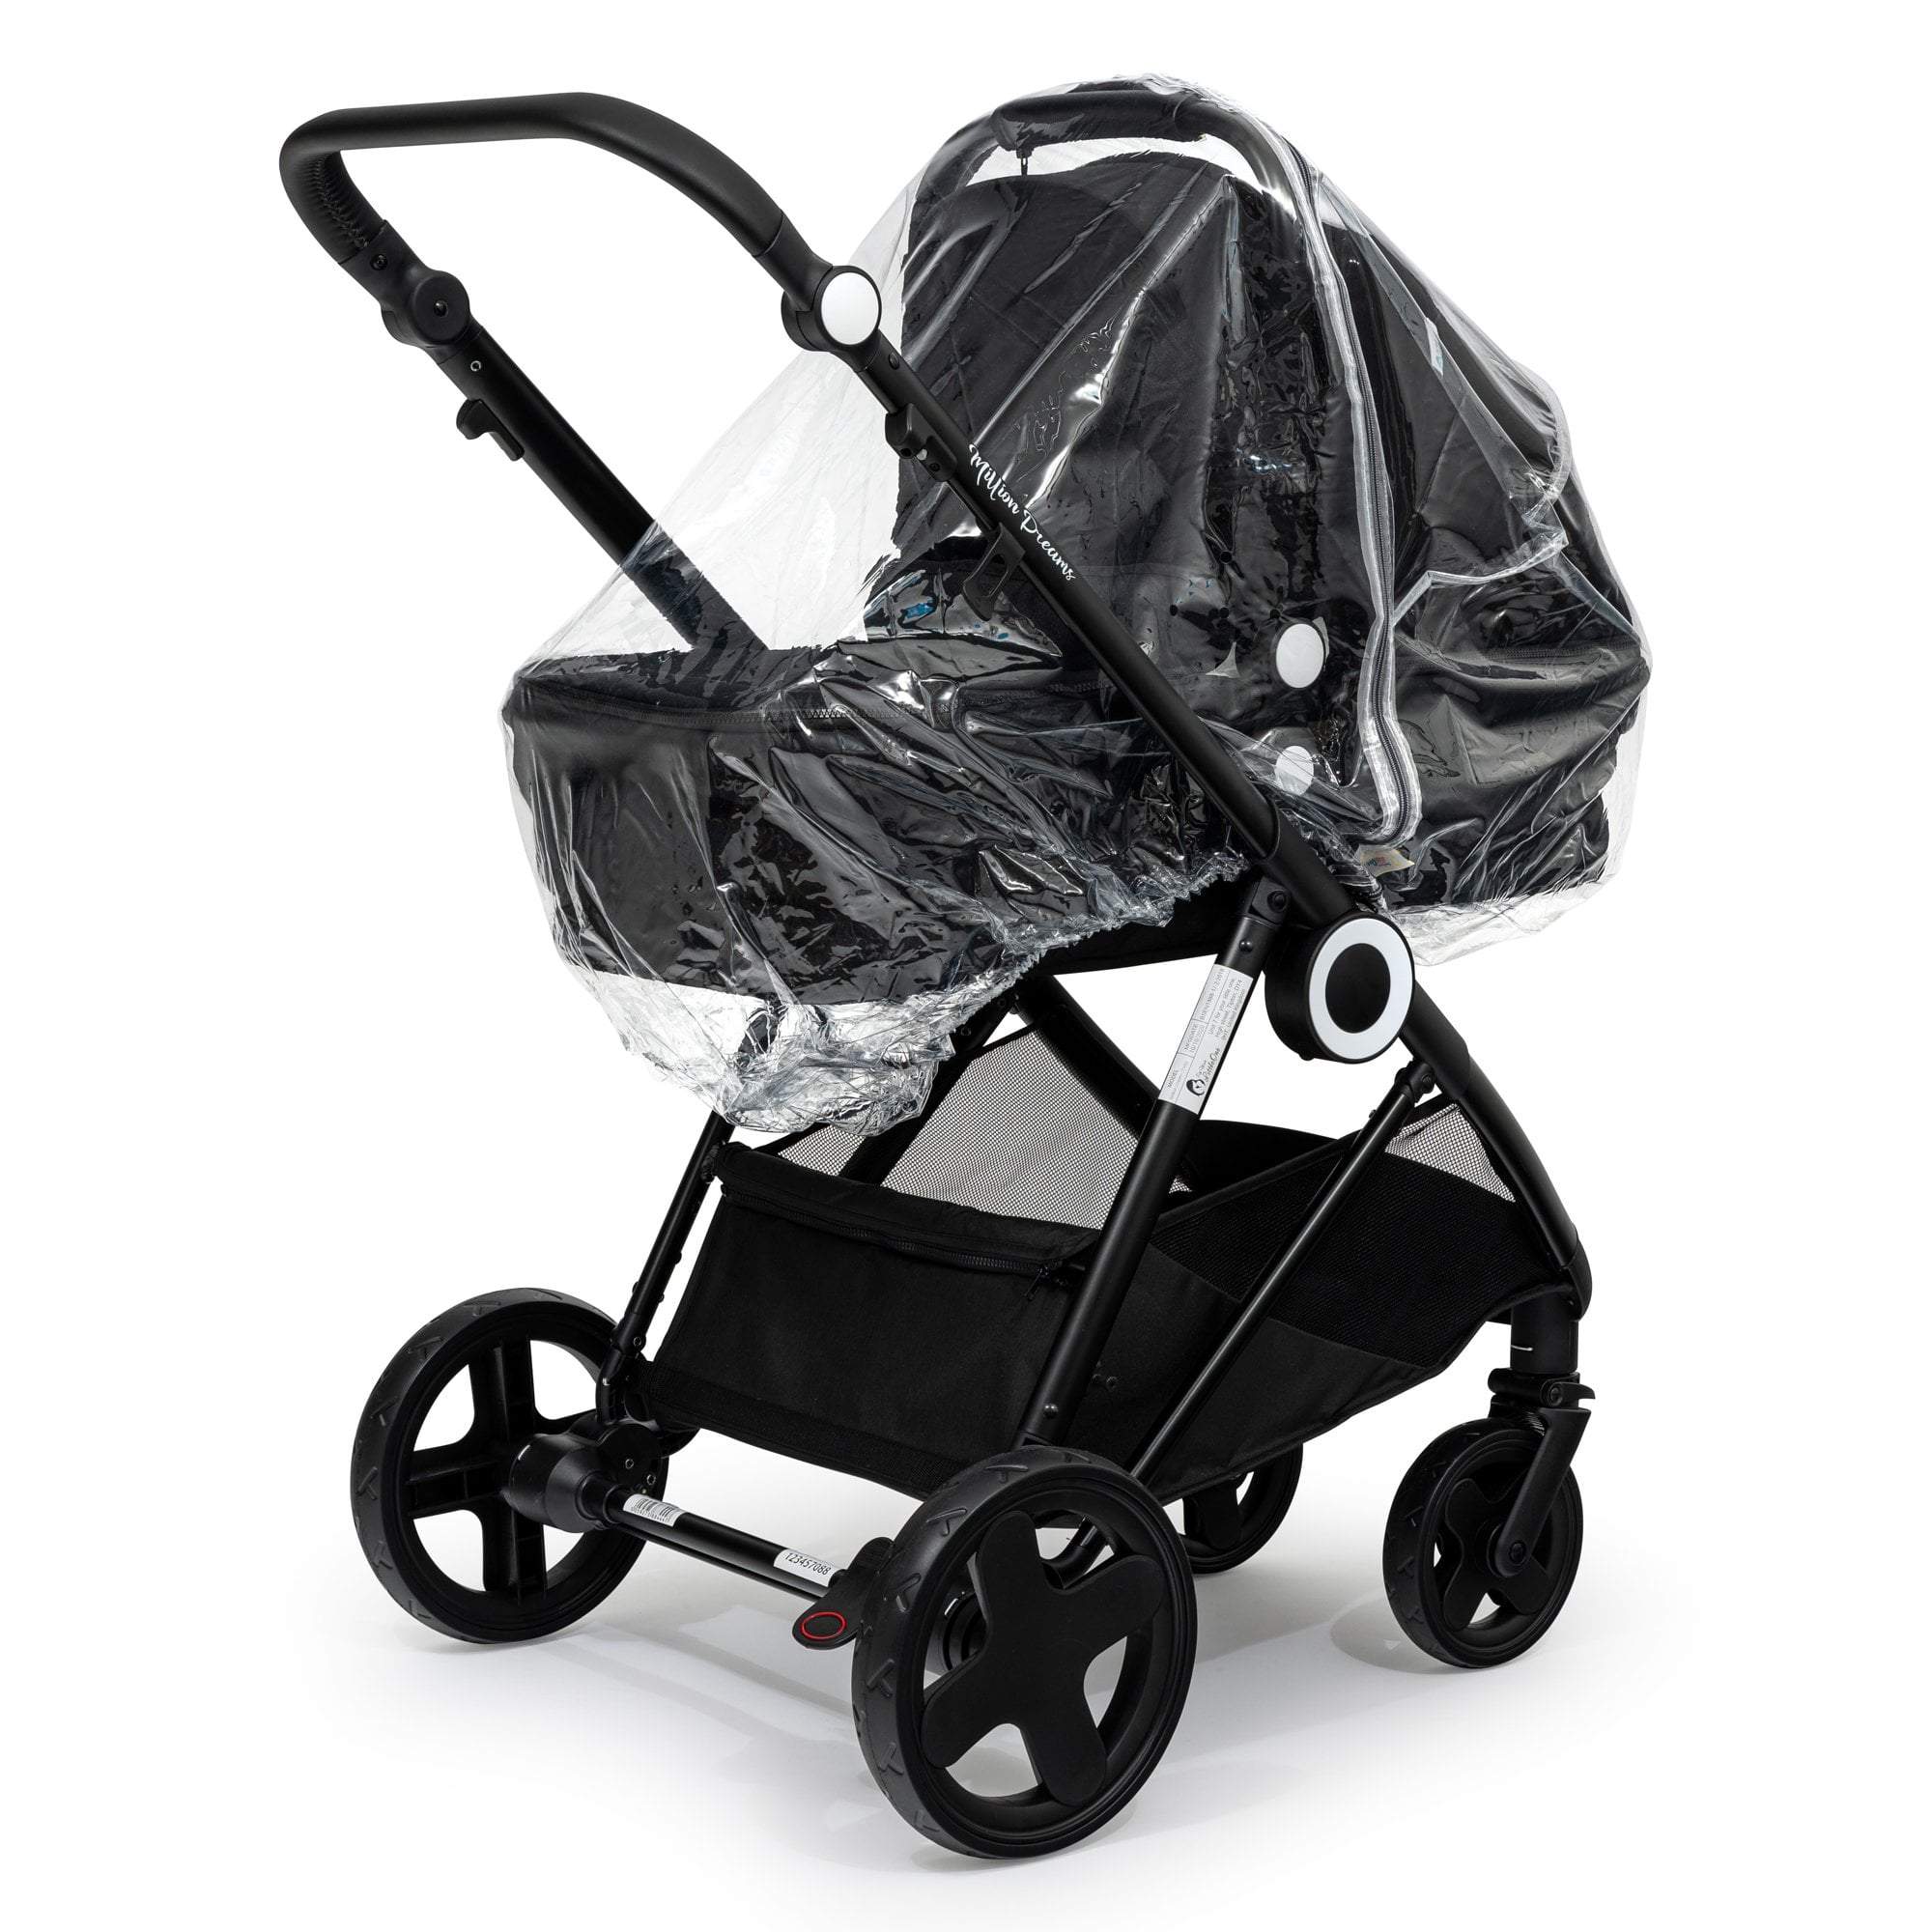 Carrycot Raincover Compatible With Phil & Teds - Fits All Models - For Your Little One